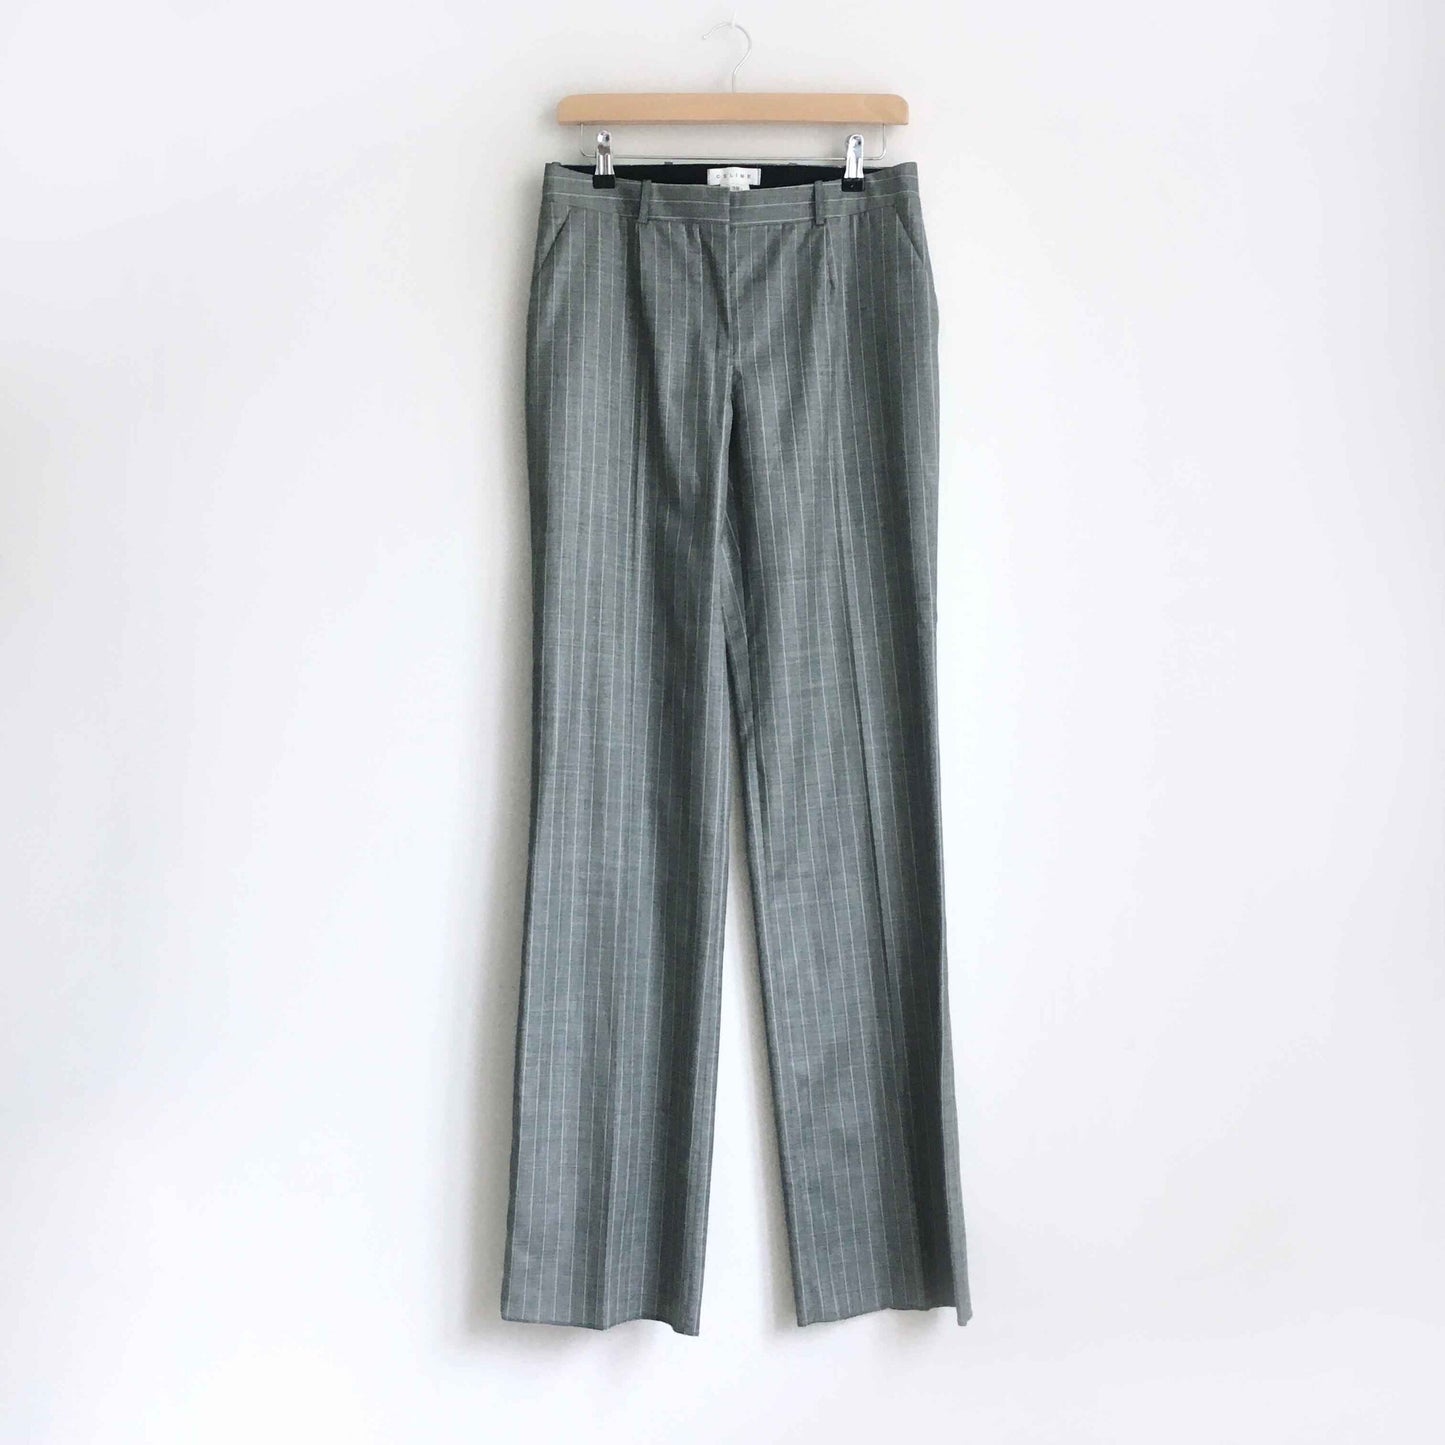 nwt celine high-rise striped wool trouser - size 38